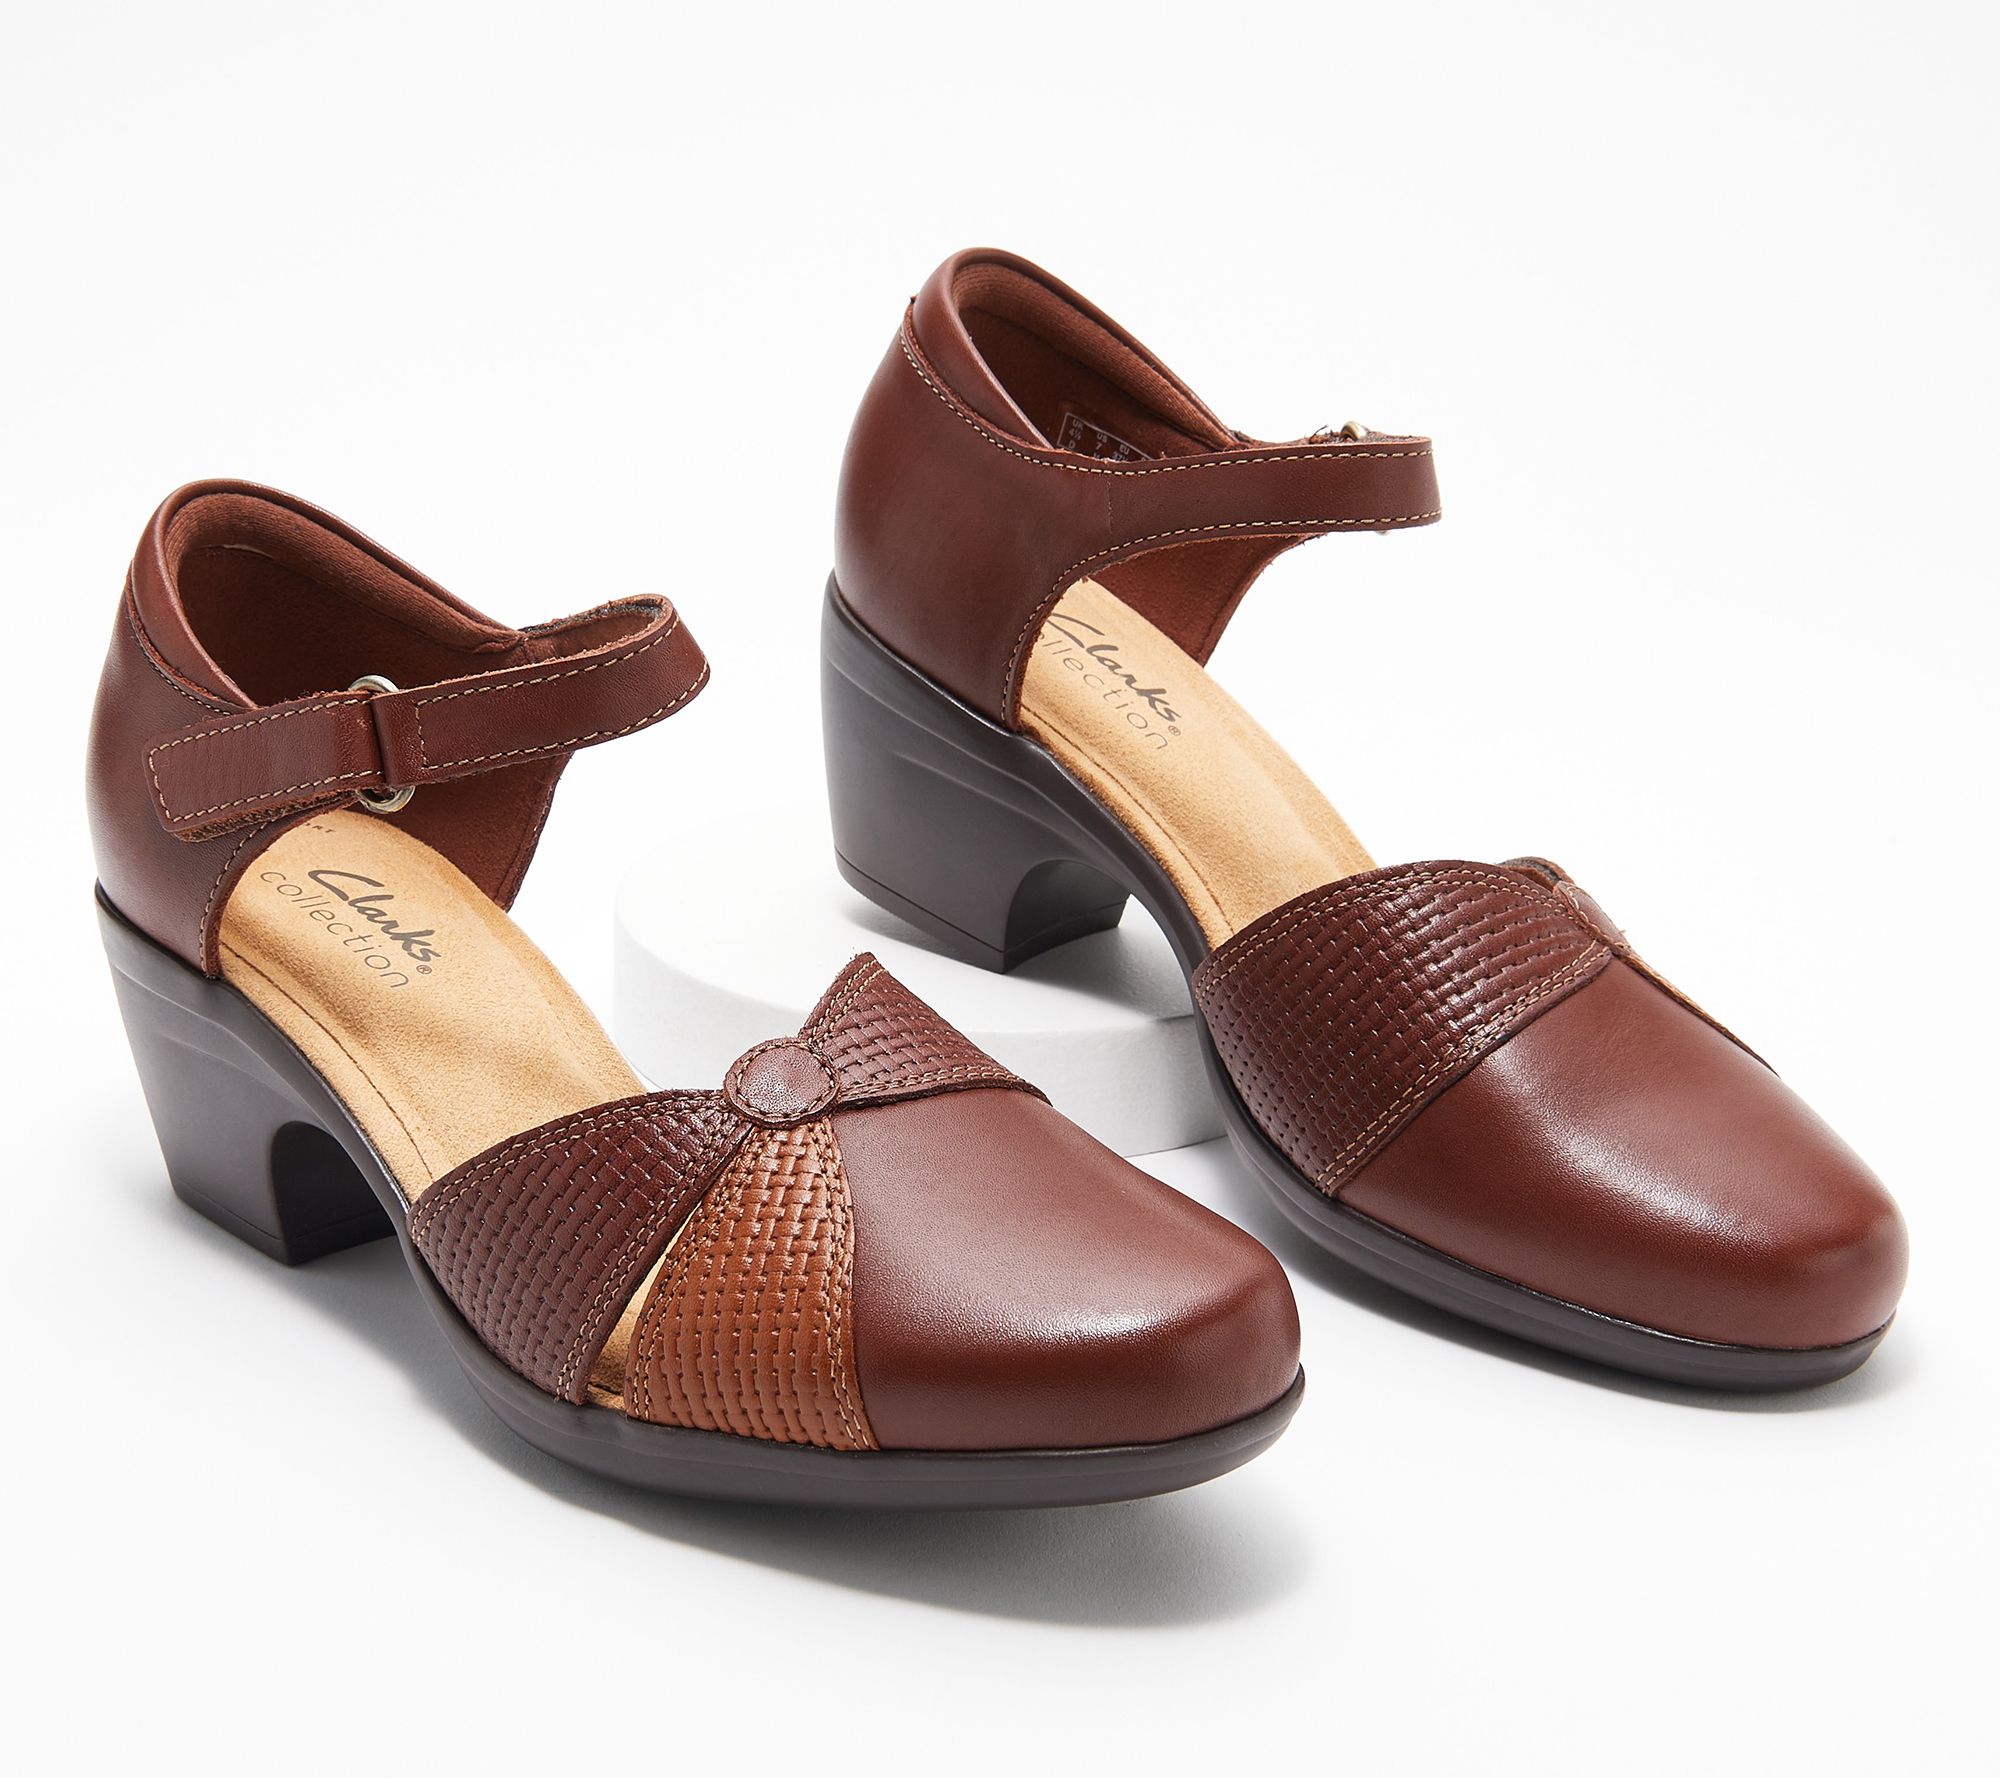 Leather Mary-Janes Emily Rae - QVC.com